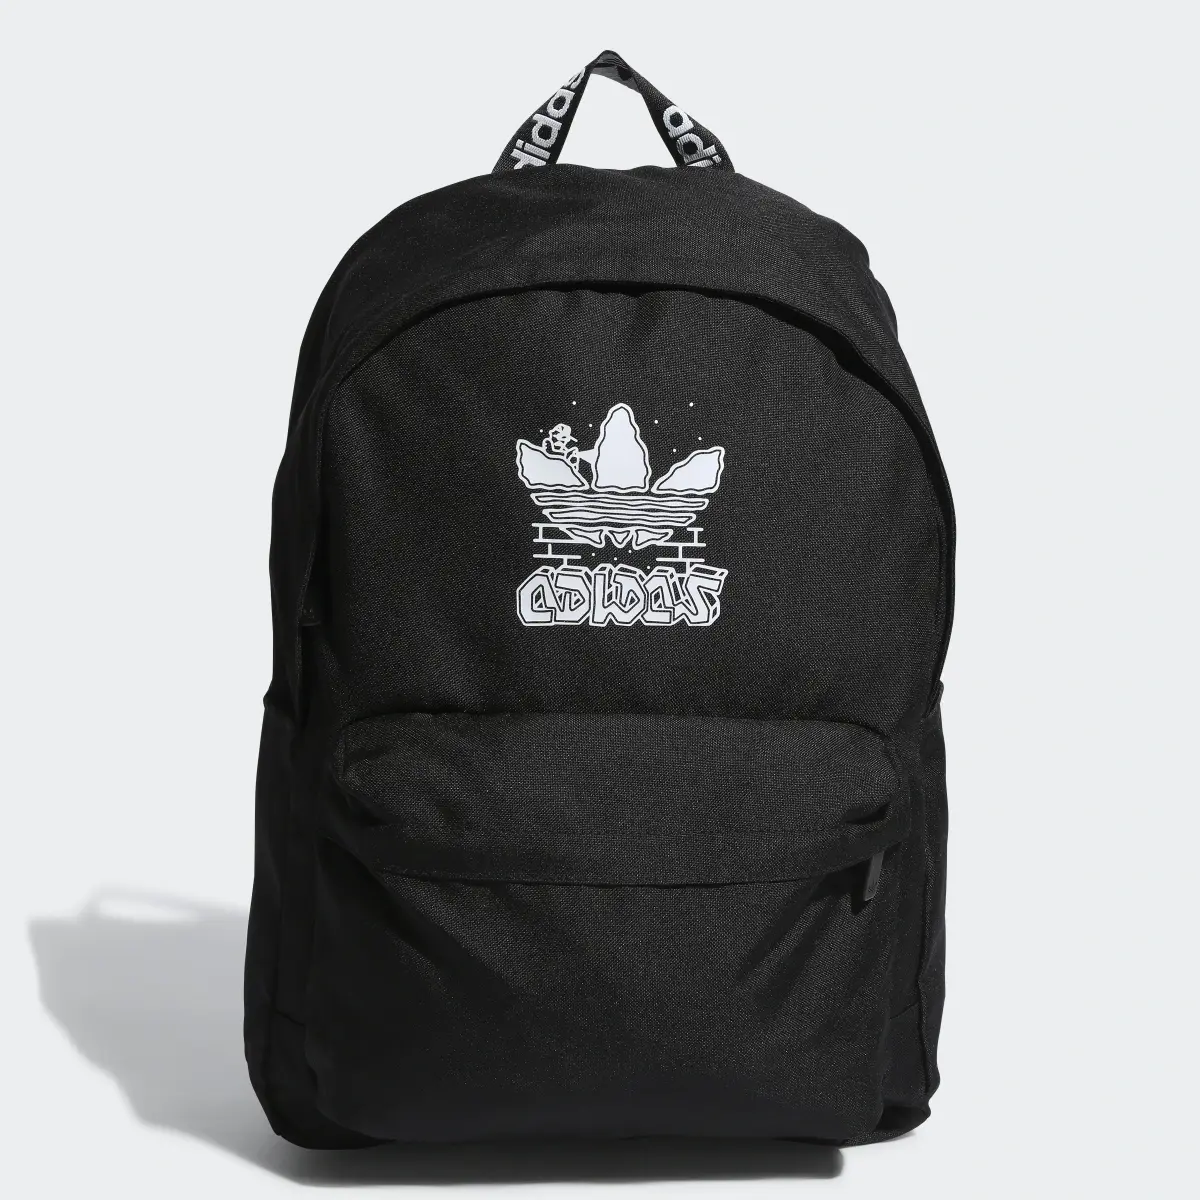 Adidas Trefoil Classic Backpack. 2